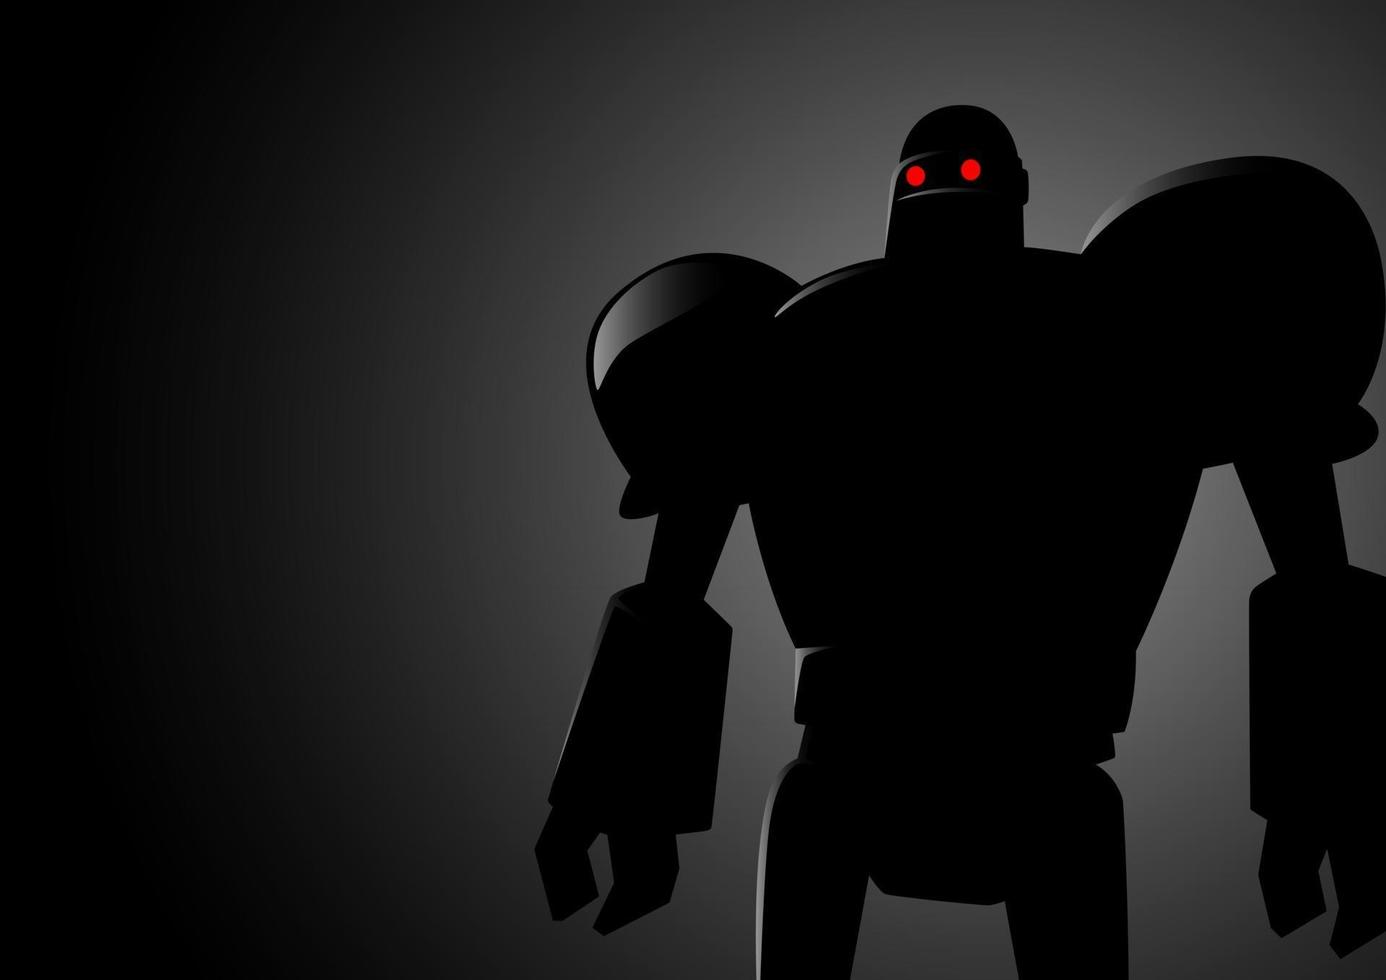 Silhouette illustration of a robot vector